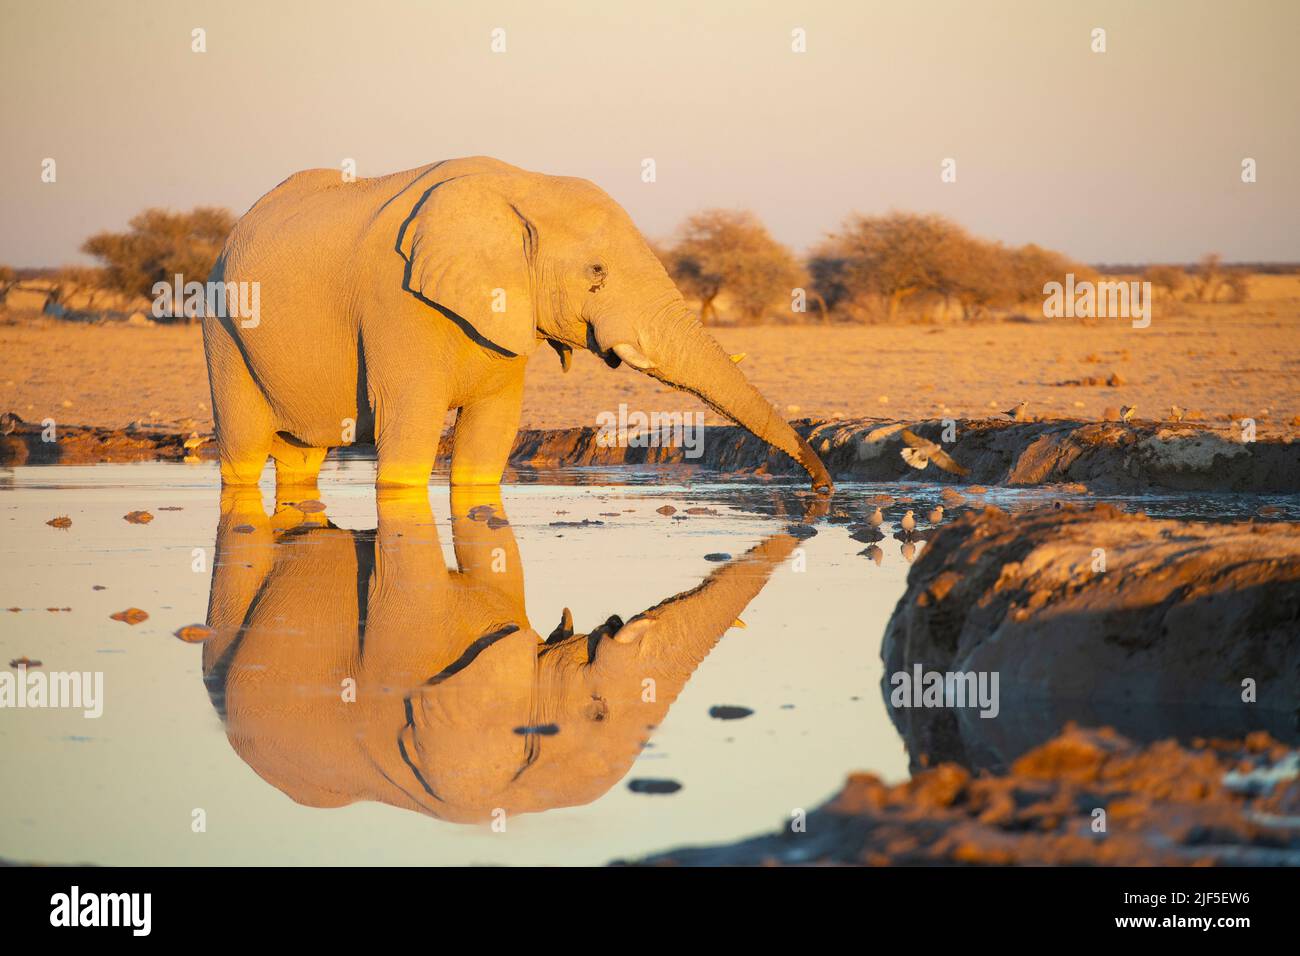 African Elephant (Loxodonta africana) at a water hole in the morning with reflection Stock Photo